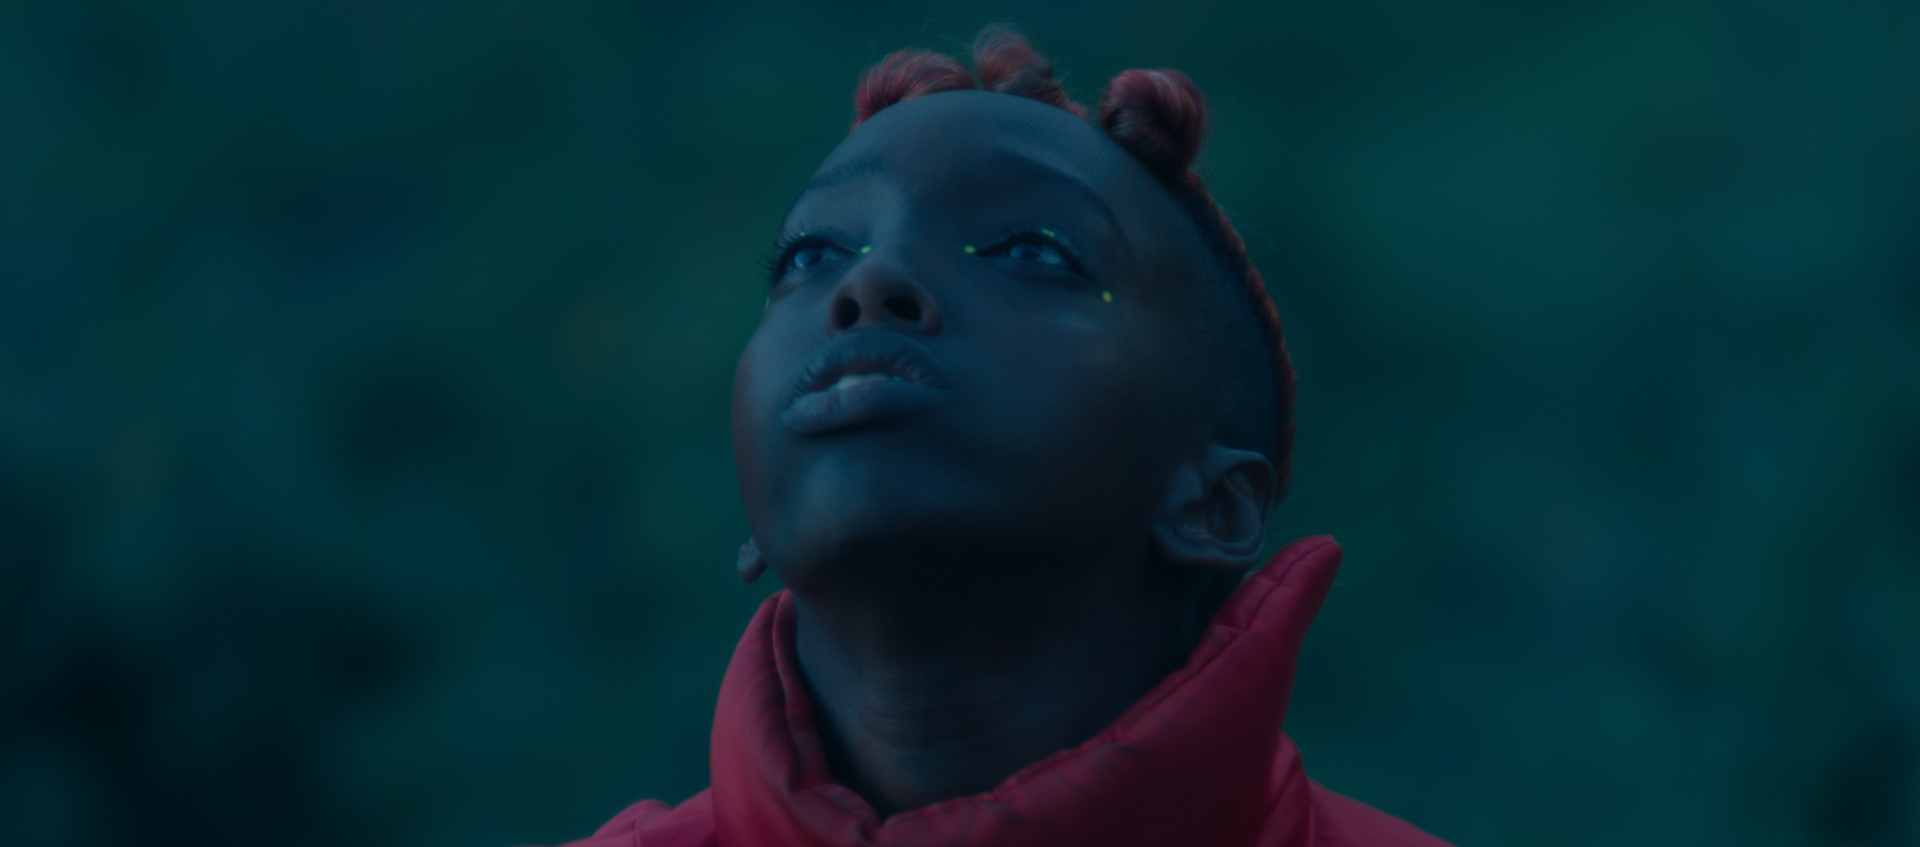 A boy looks up he is wearing a red shirt with a high collar and has braids and dots on either side of his eyes.